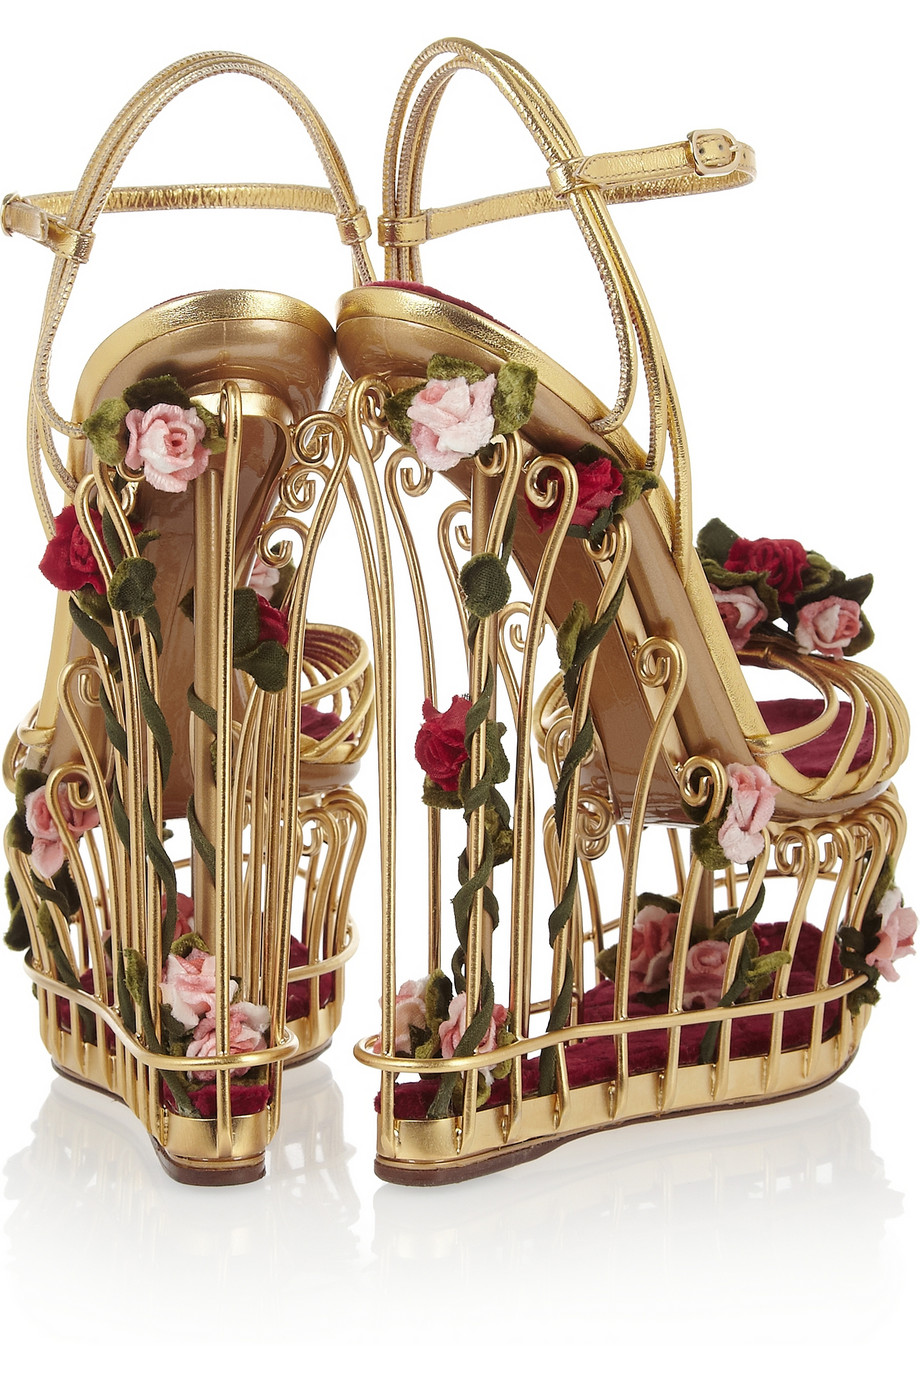 Dolce & Gabbana Roseembellished Metallic Leather Cage Sandals in ...